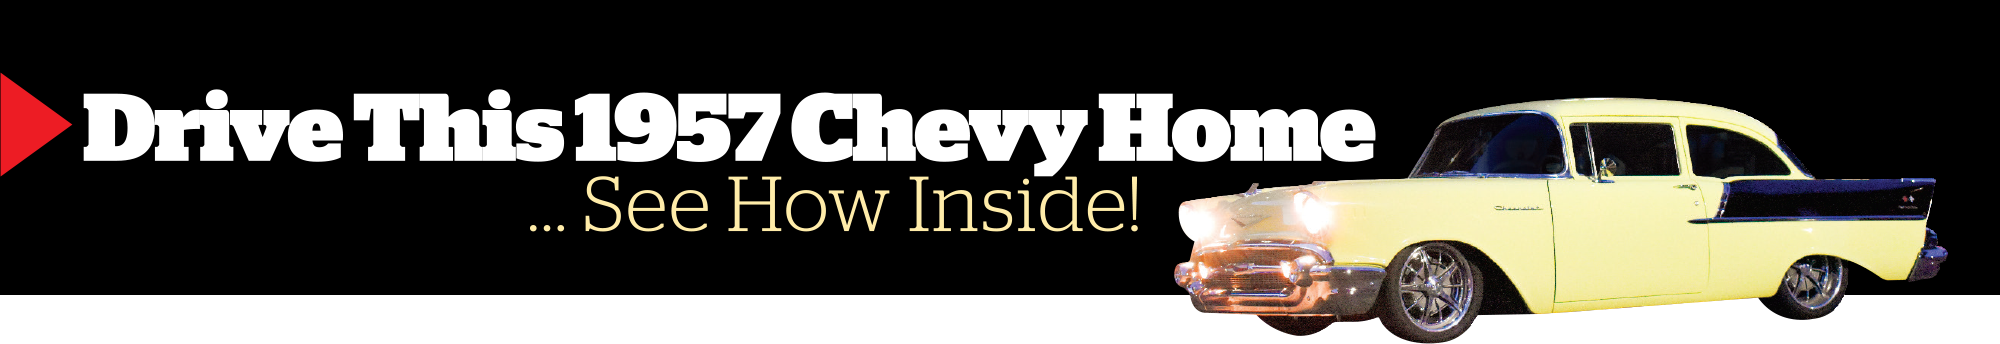 Drive This 1957 Chevy Home... See How Inside! typography with yellow chevy car